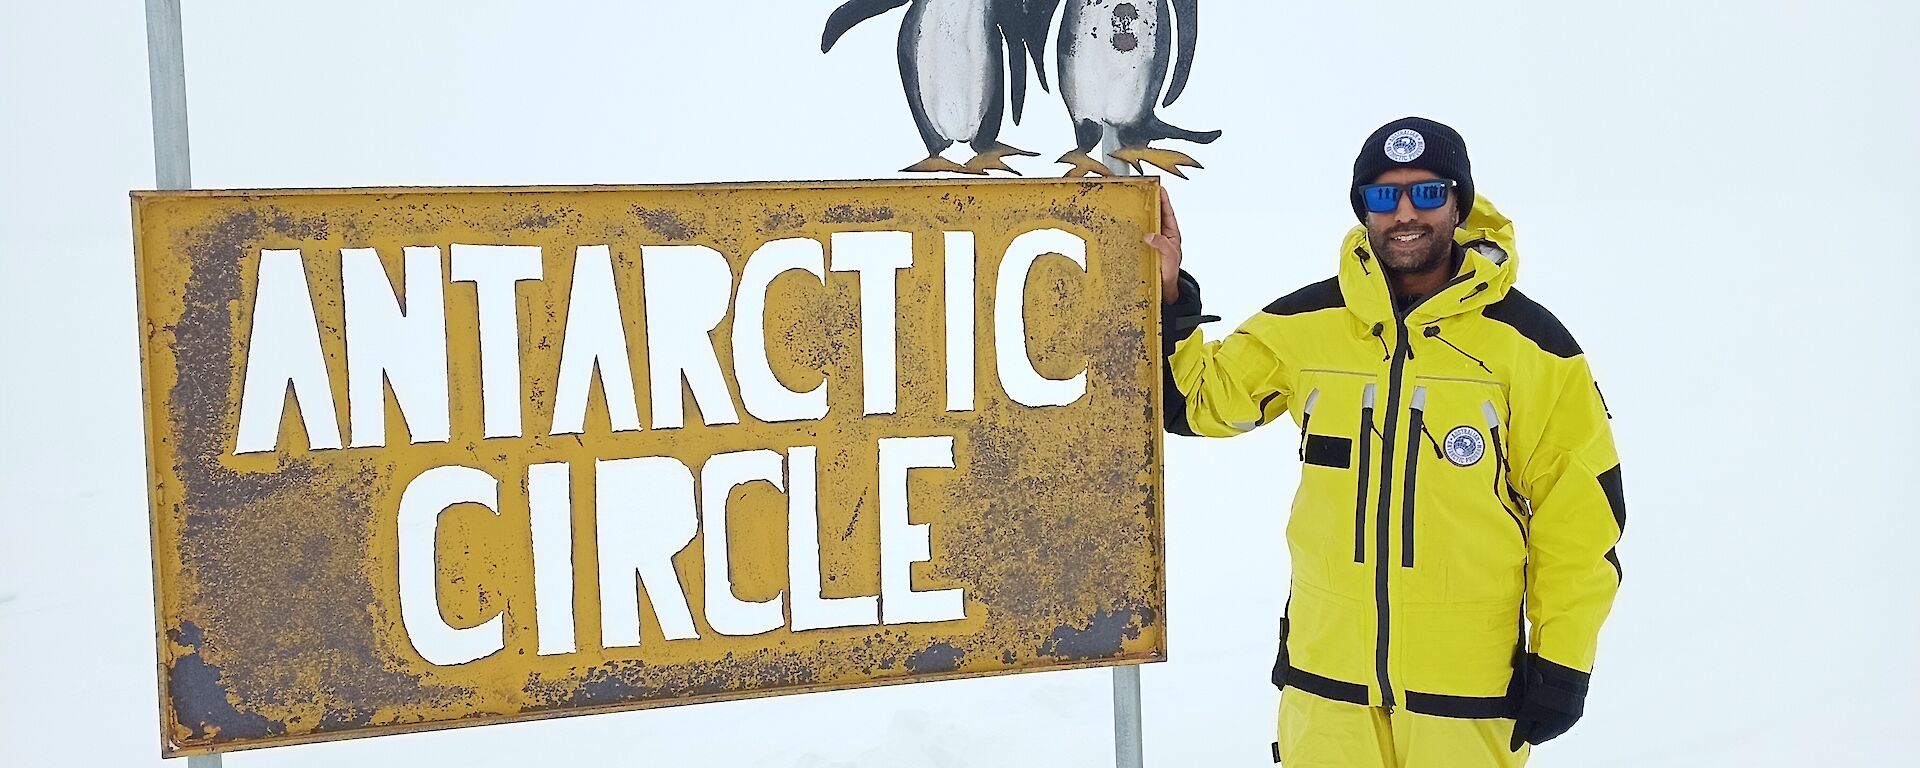 A man in yellow survival clothing stands to the right of a metal sign, with the background completely white with snow. The sign says Antarctic Circle, and has two small metal penguins on the top of it.